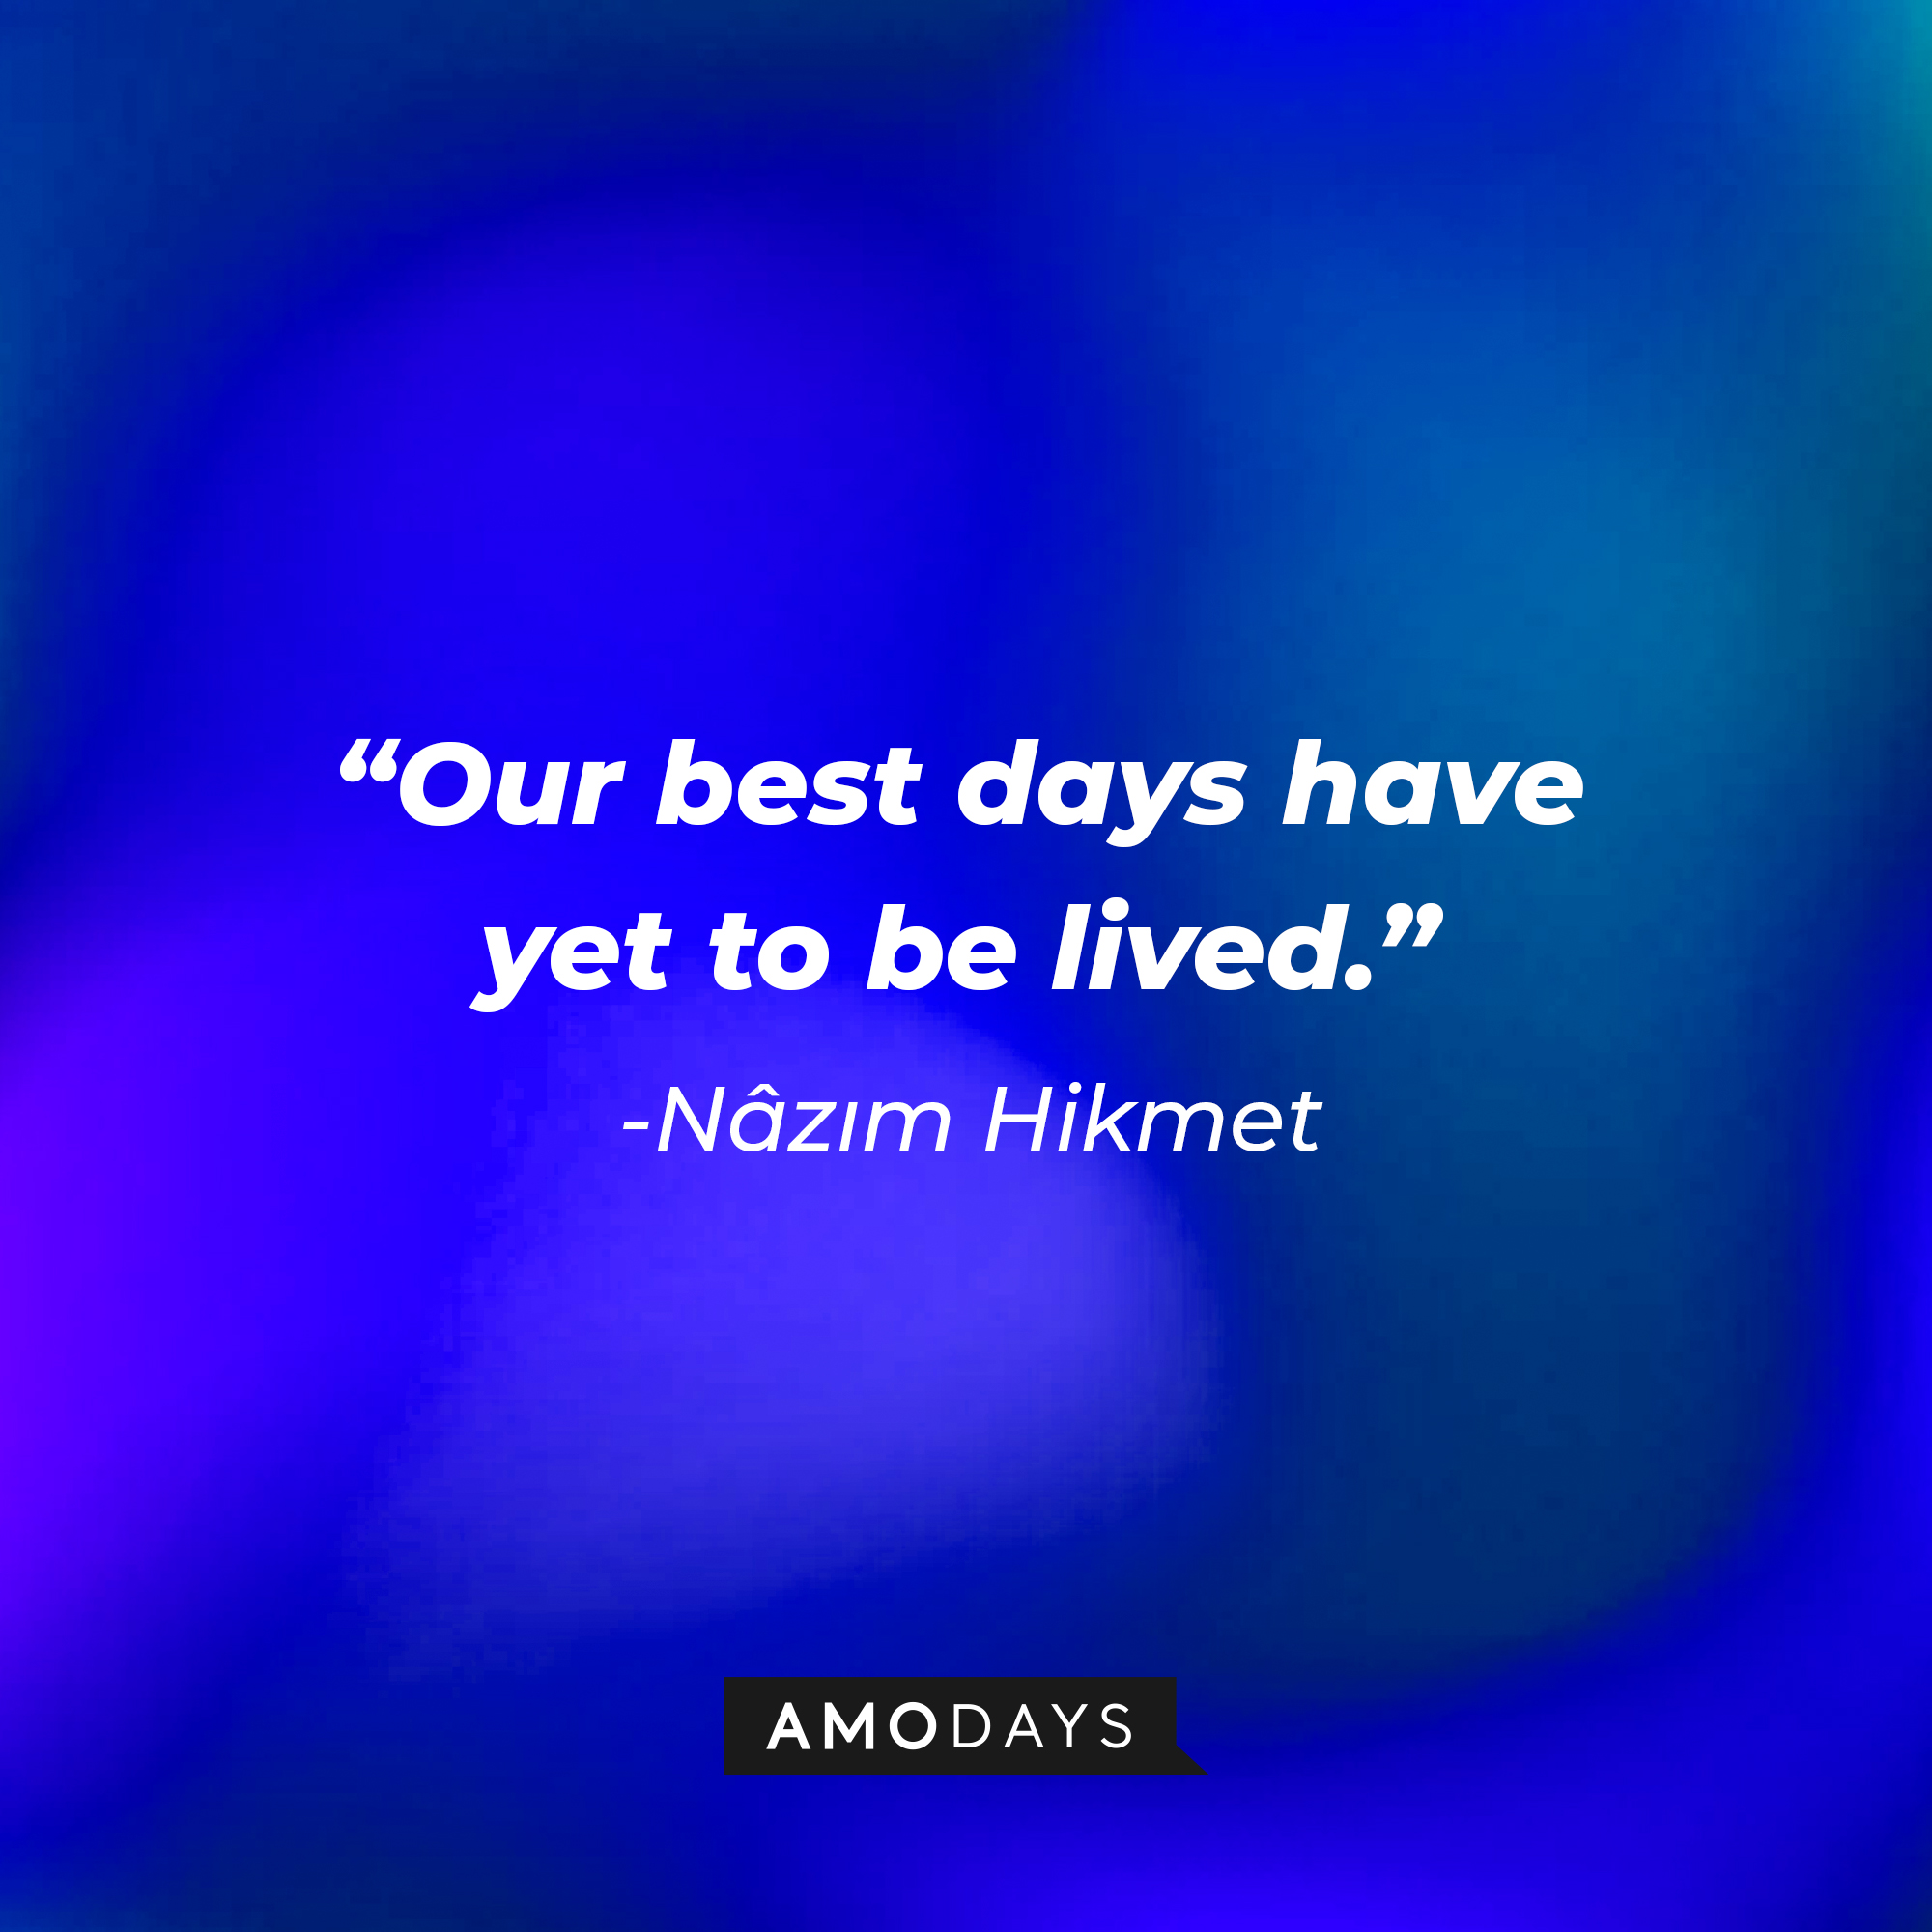 Nâzım Hikmet's quote: "Our best days have yet to be lived."  | Image: Amodays